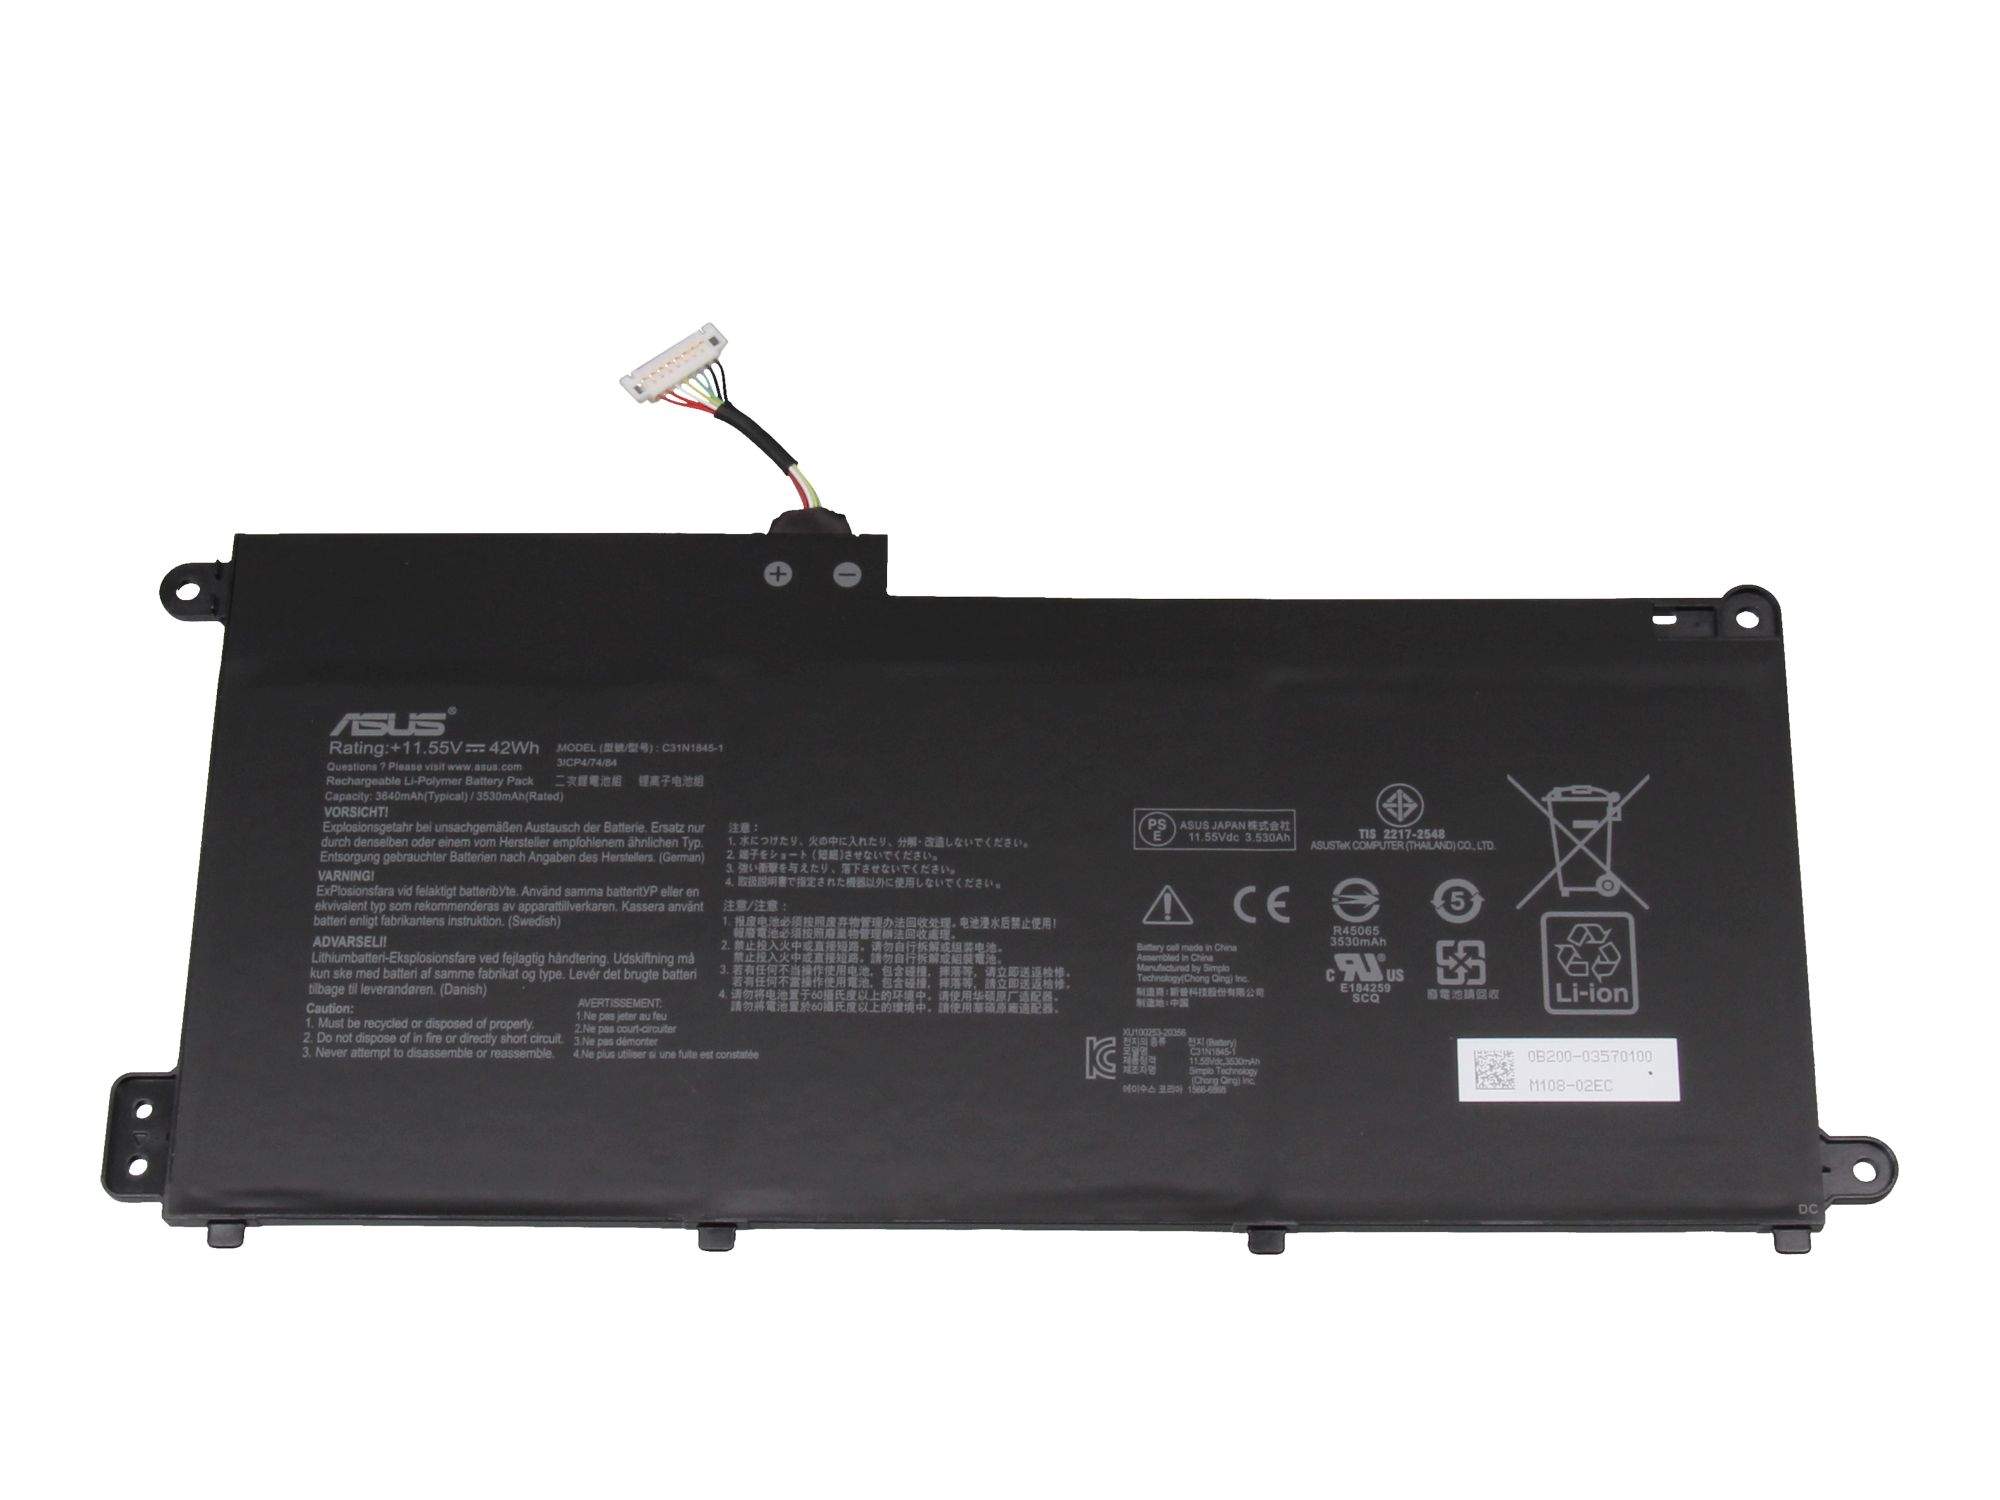 ASUS C436 BATTERY/COS